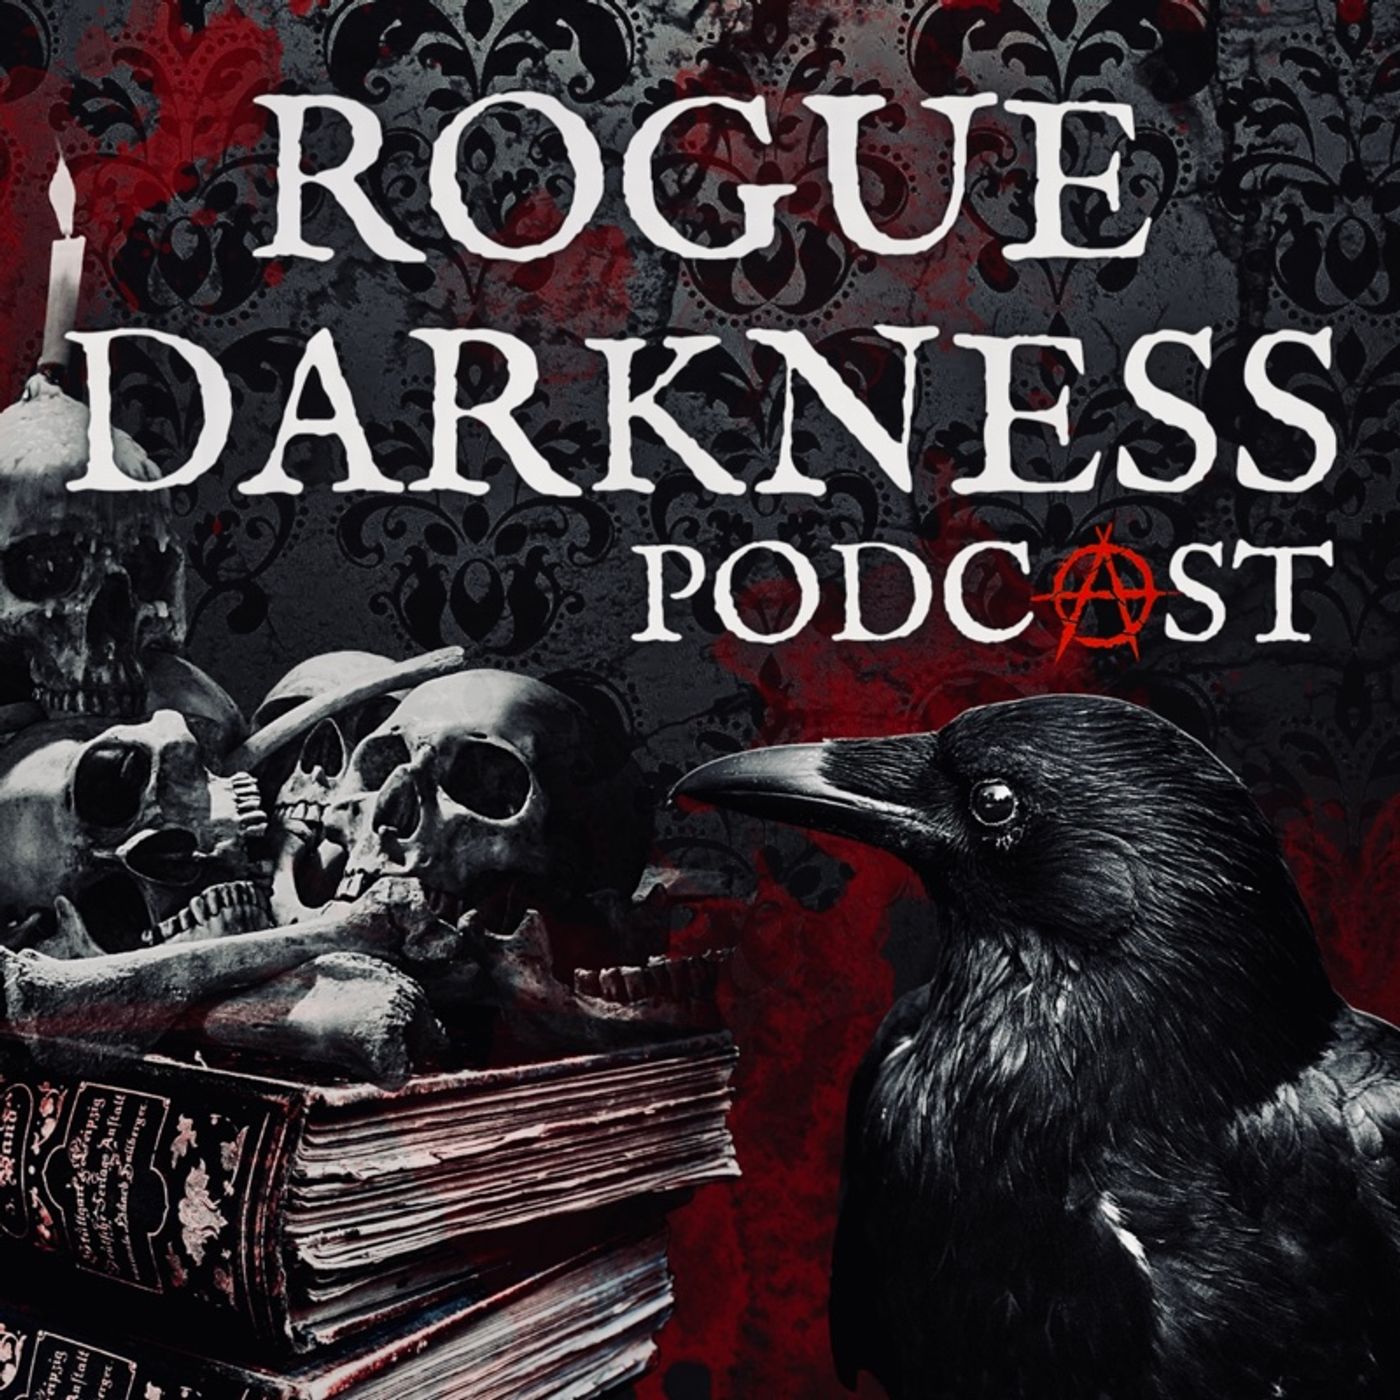 Trailer: Welcome to Rogue Darkness!